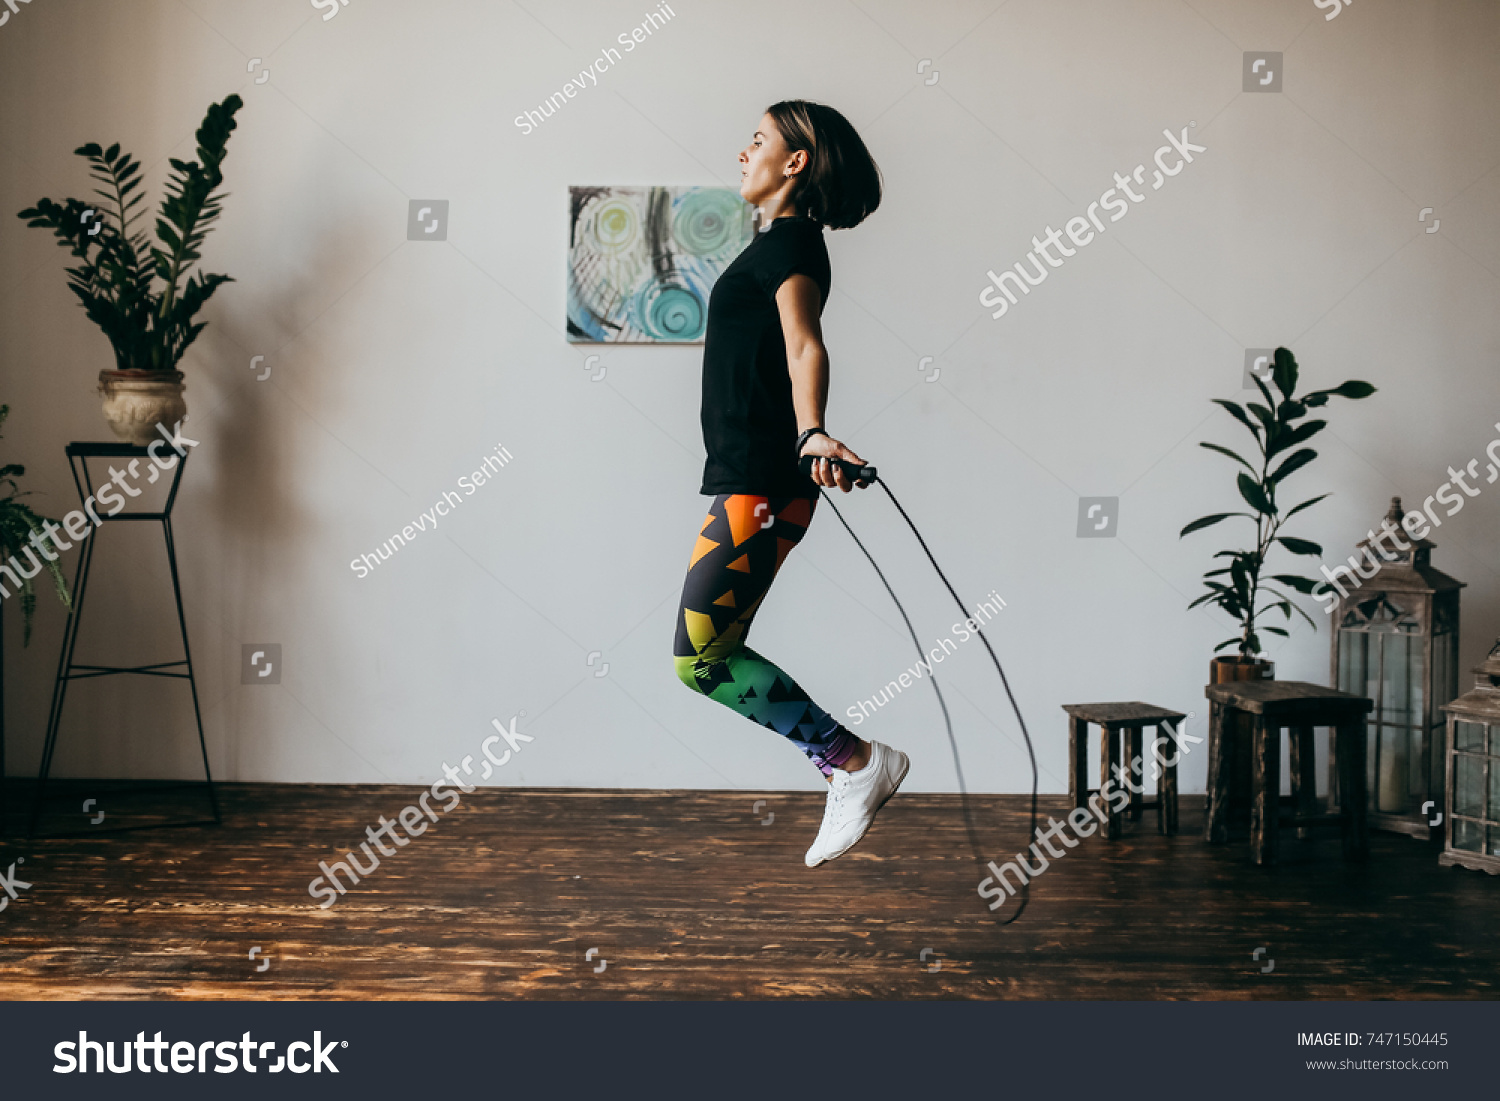 Young fitness woman jumping rope at home #747150445